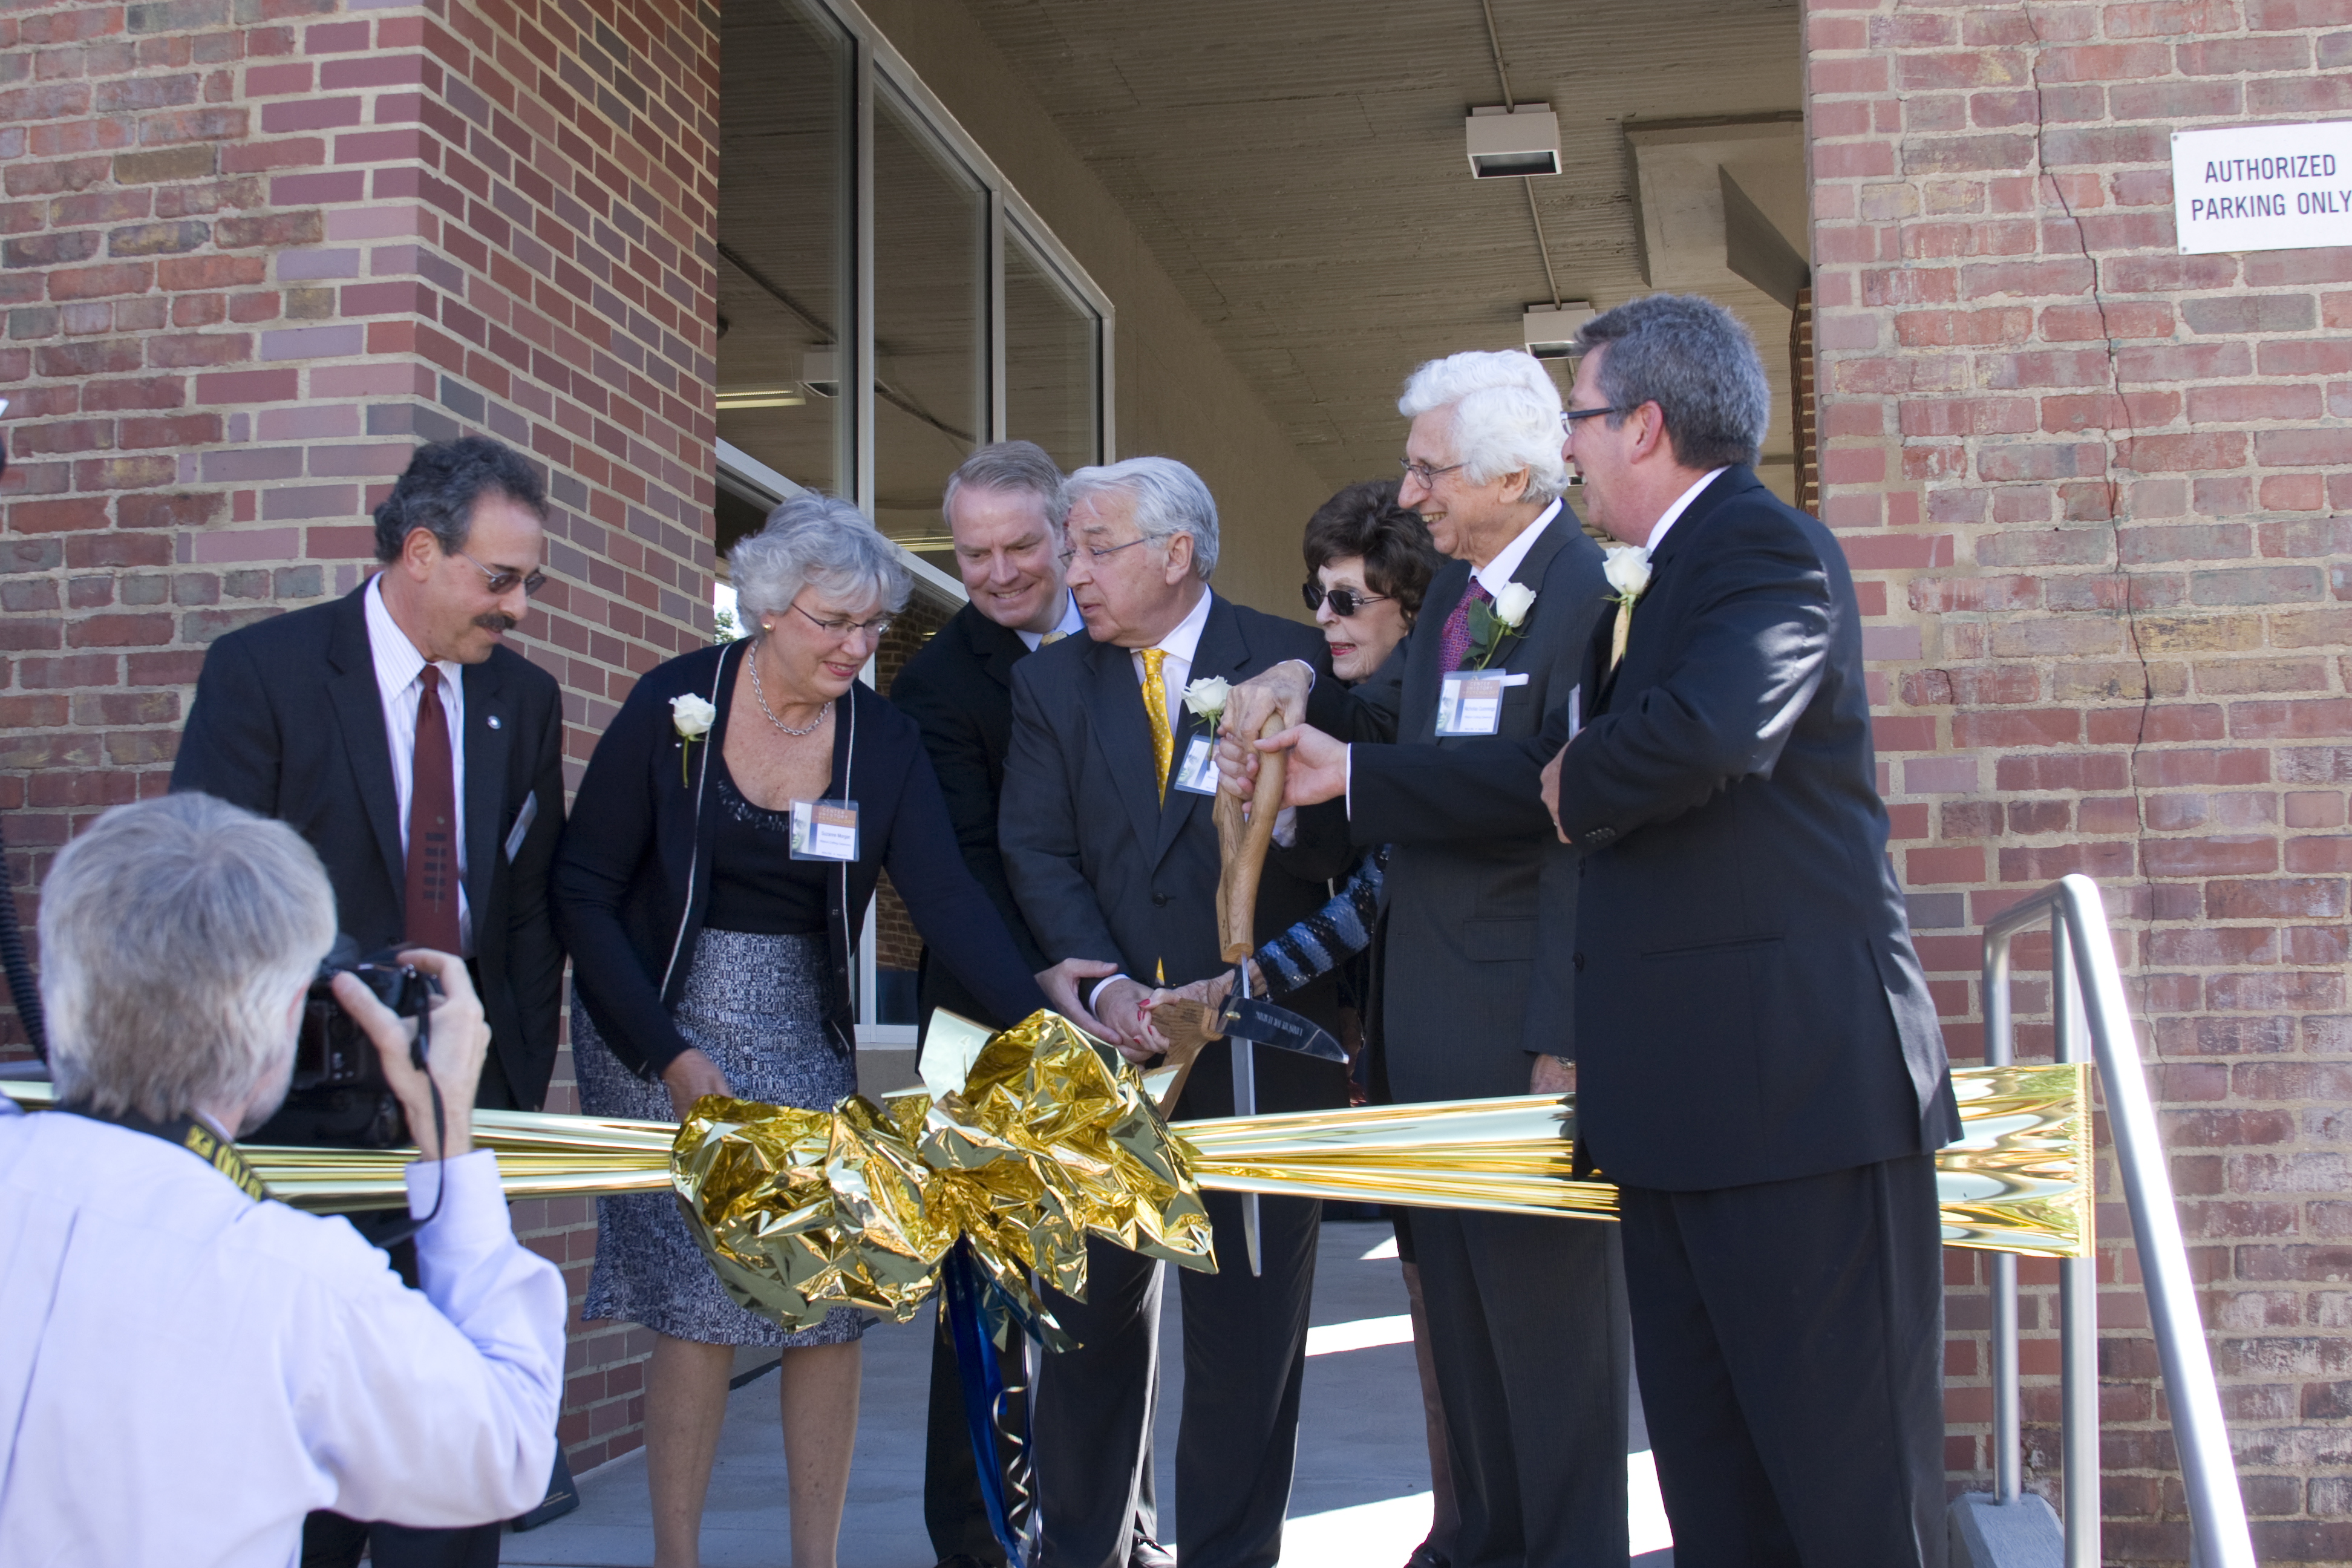 Dr. Baker, Drs. Nicholas Dorothy Cummings and others cutting the ribbon to the museum